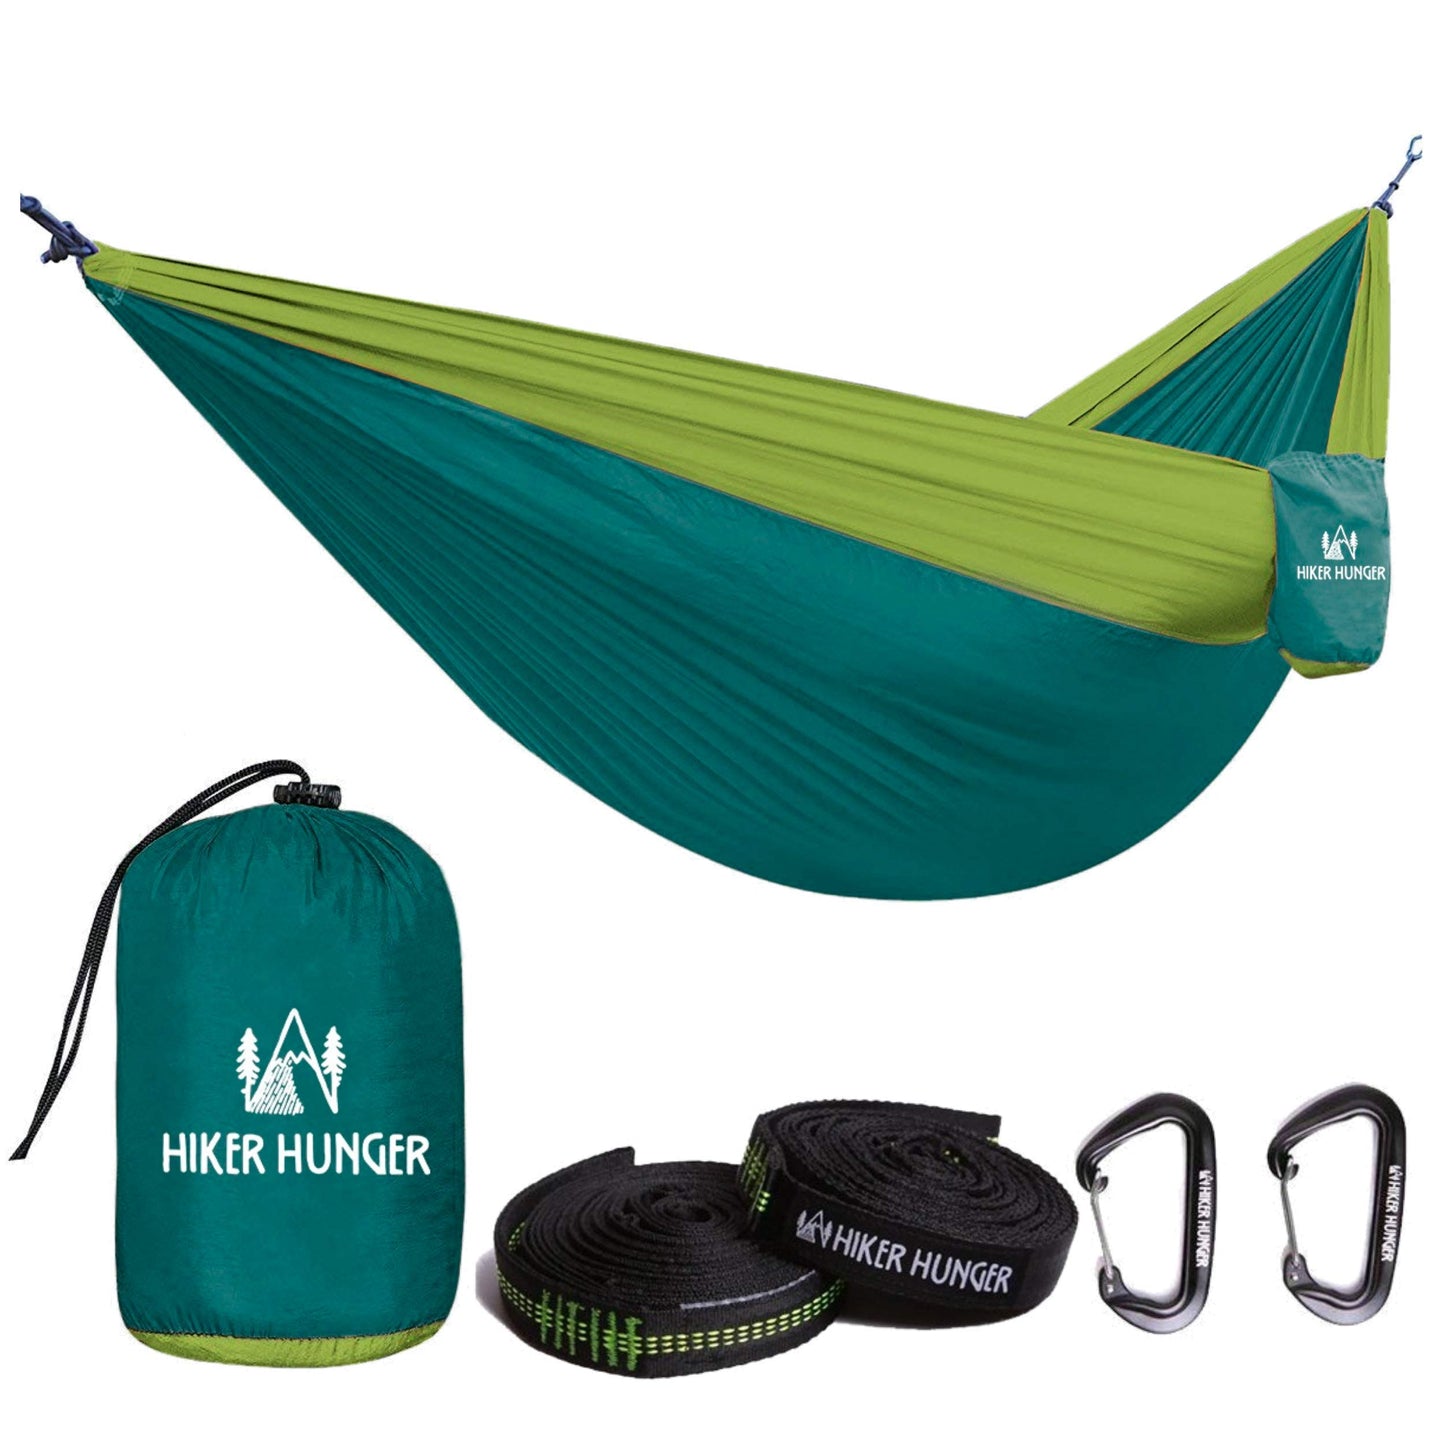 Hammock Camping Double - Hiker Hunger